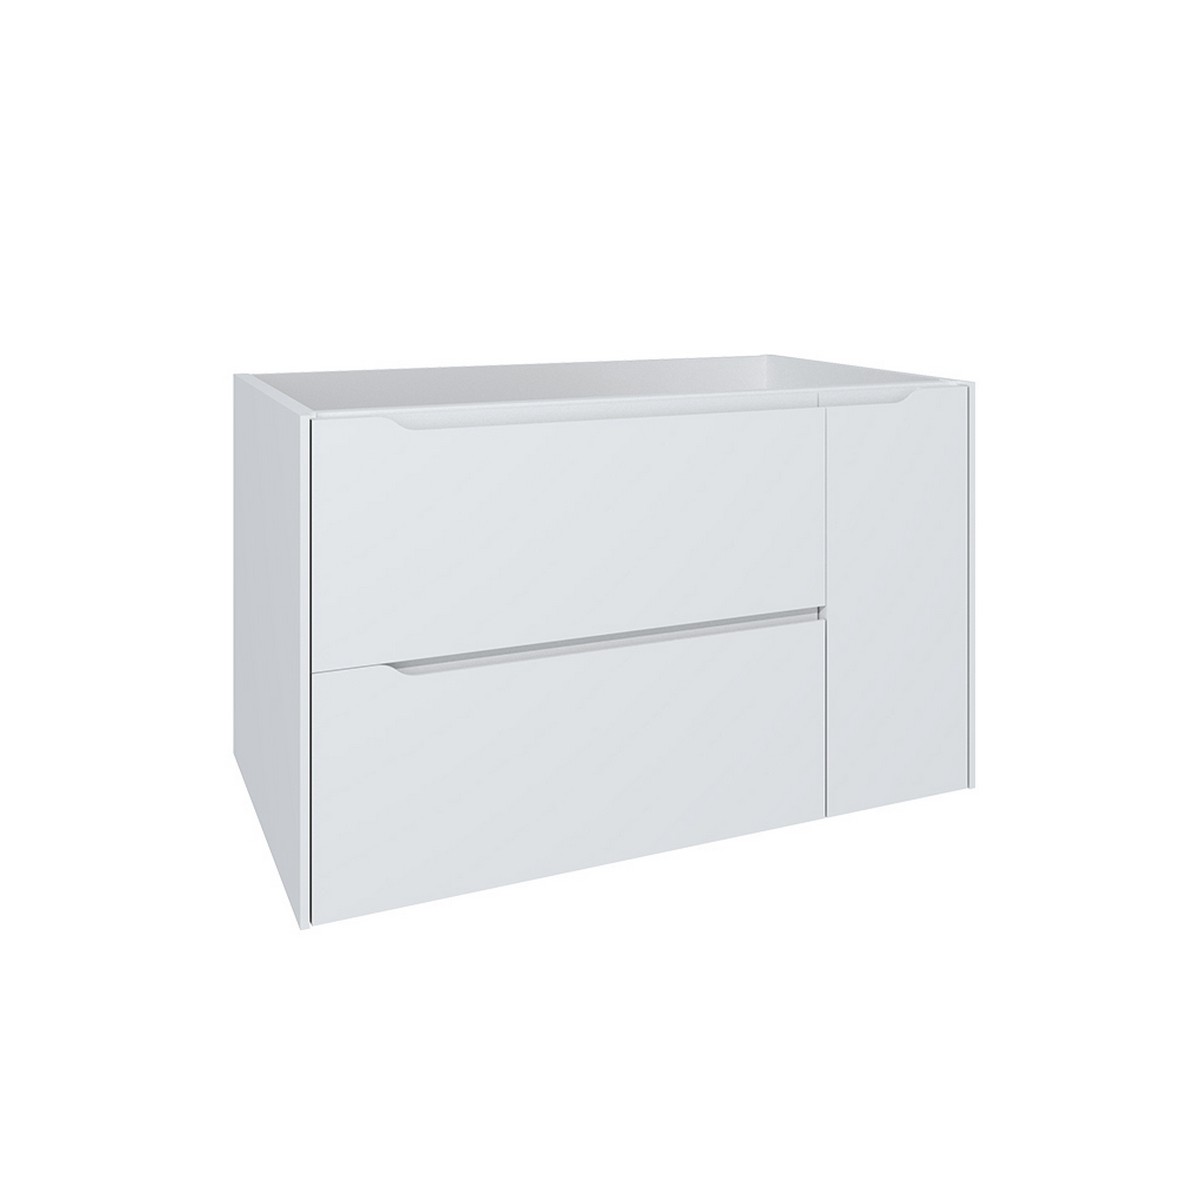 DAX DAX-CEN0232 CENIT 32 INCH WALL-MOUNTED SINGLE SINK BATHROOM VANITY CABINET ONLY